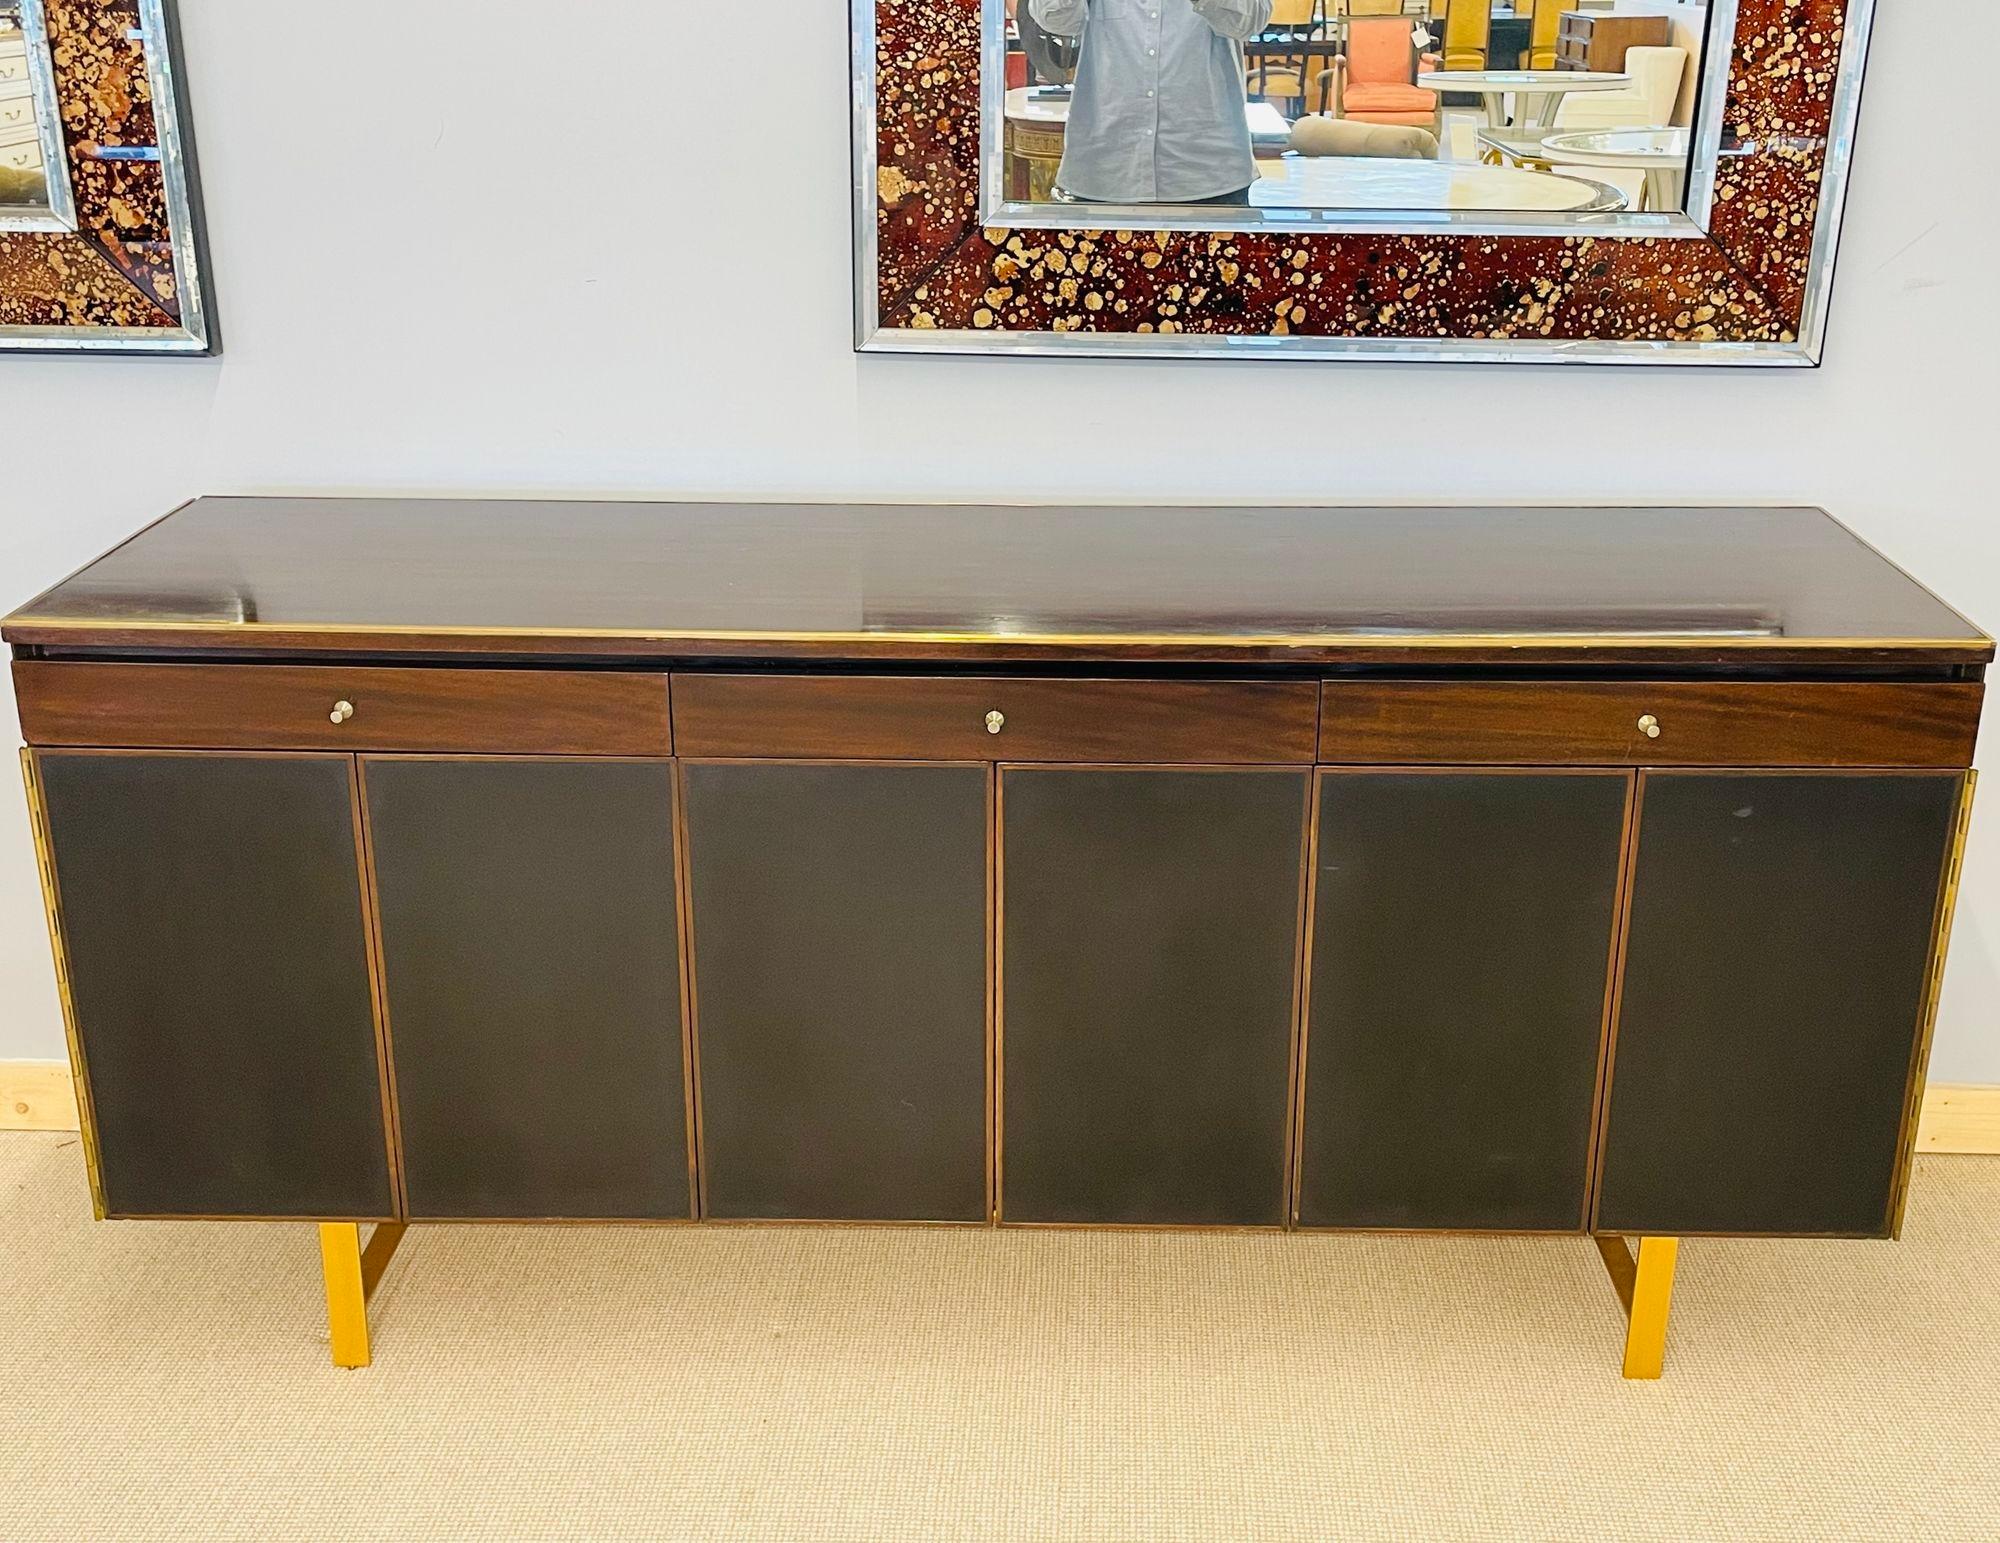 Brass Pair of Mid-Century Modern Credenzas / Sideboards by Paul McCobb